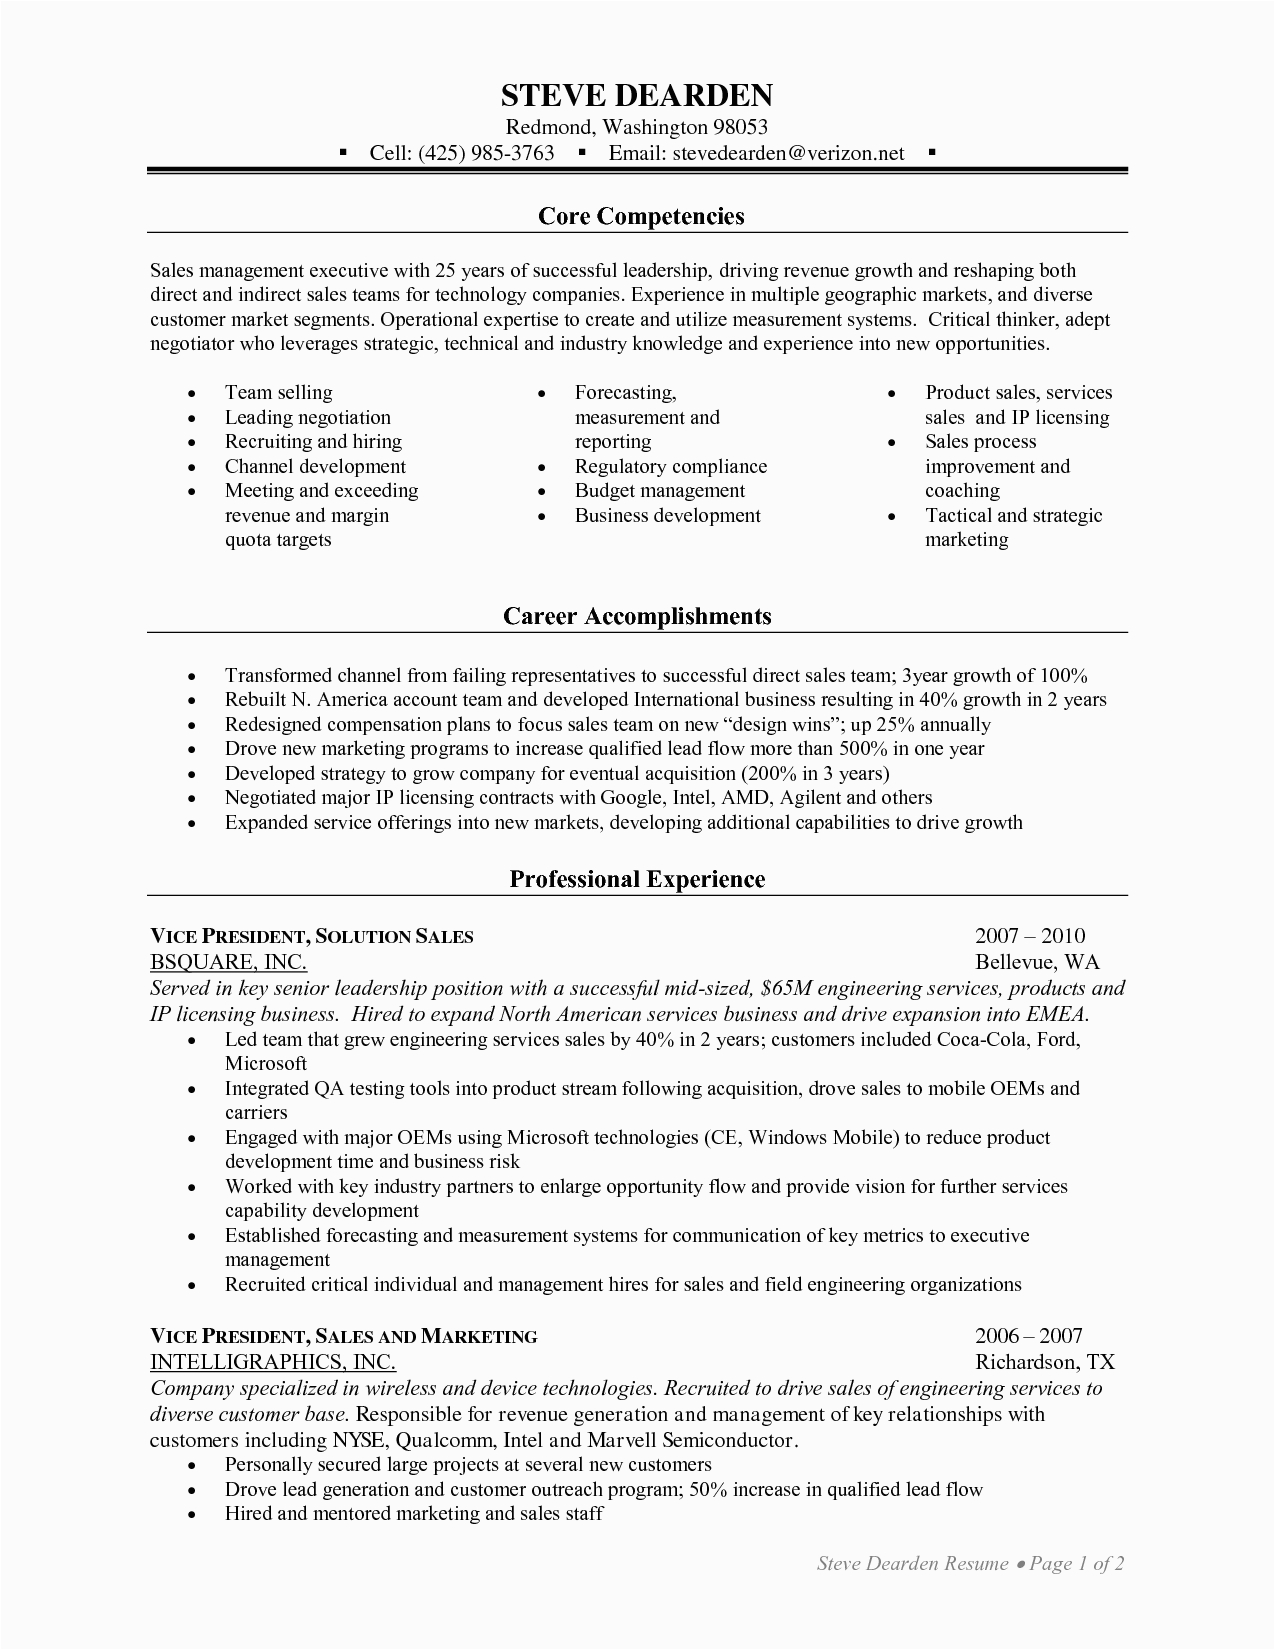 Sample Of Skills and Competencies In Resume Key Petencies with Images